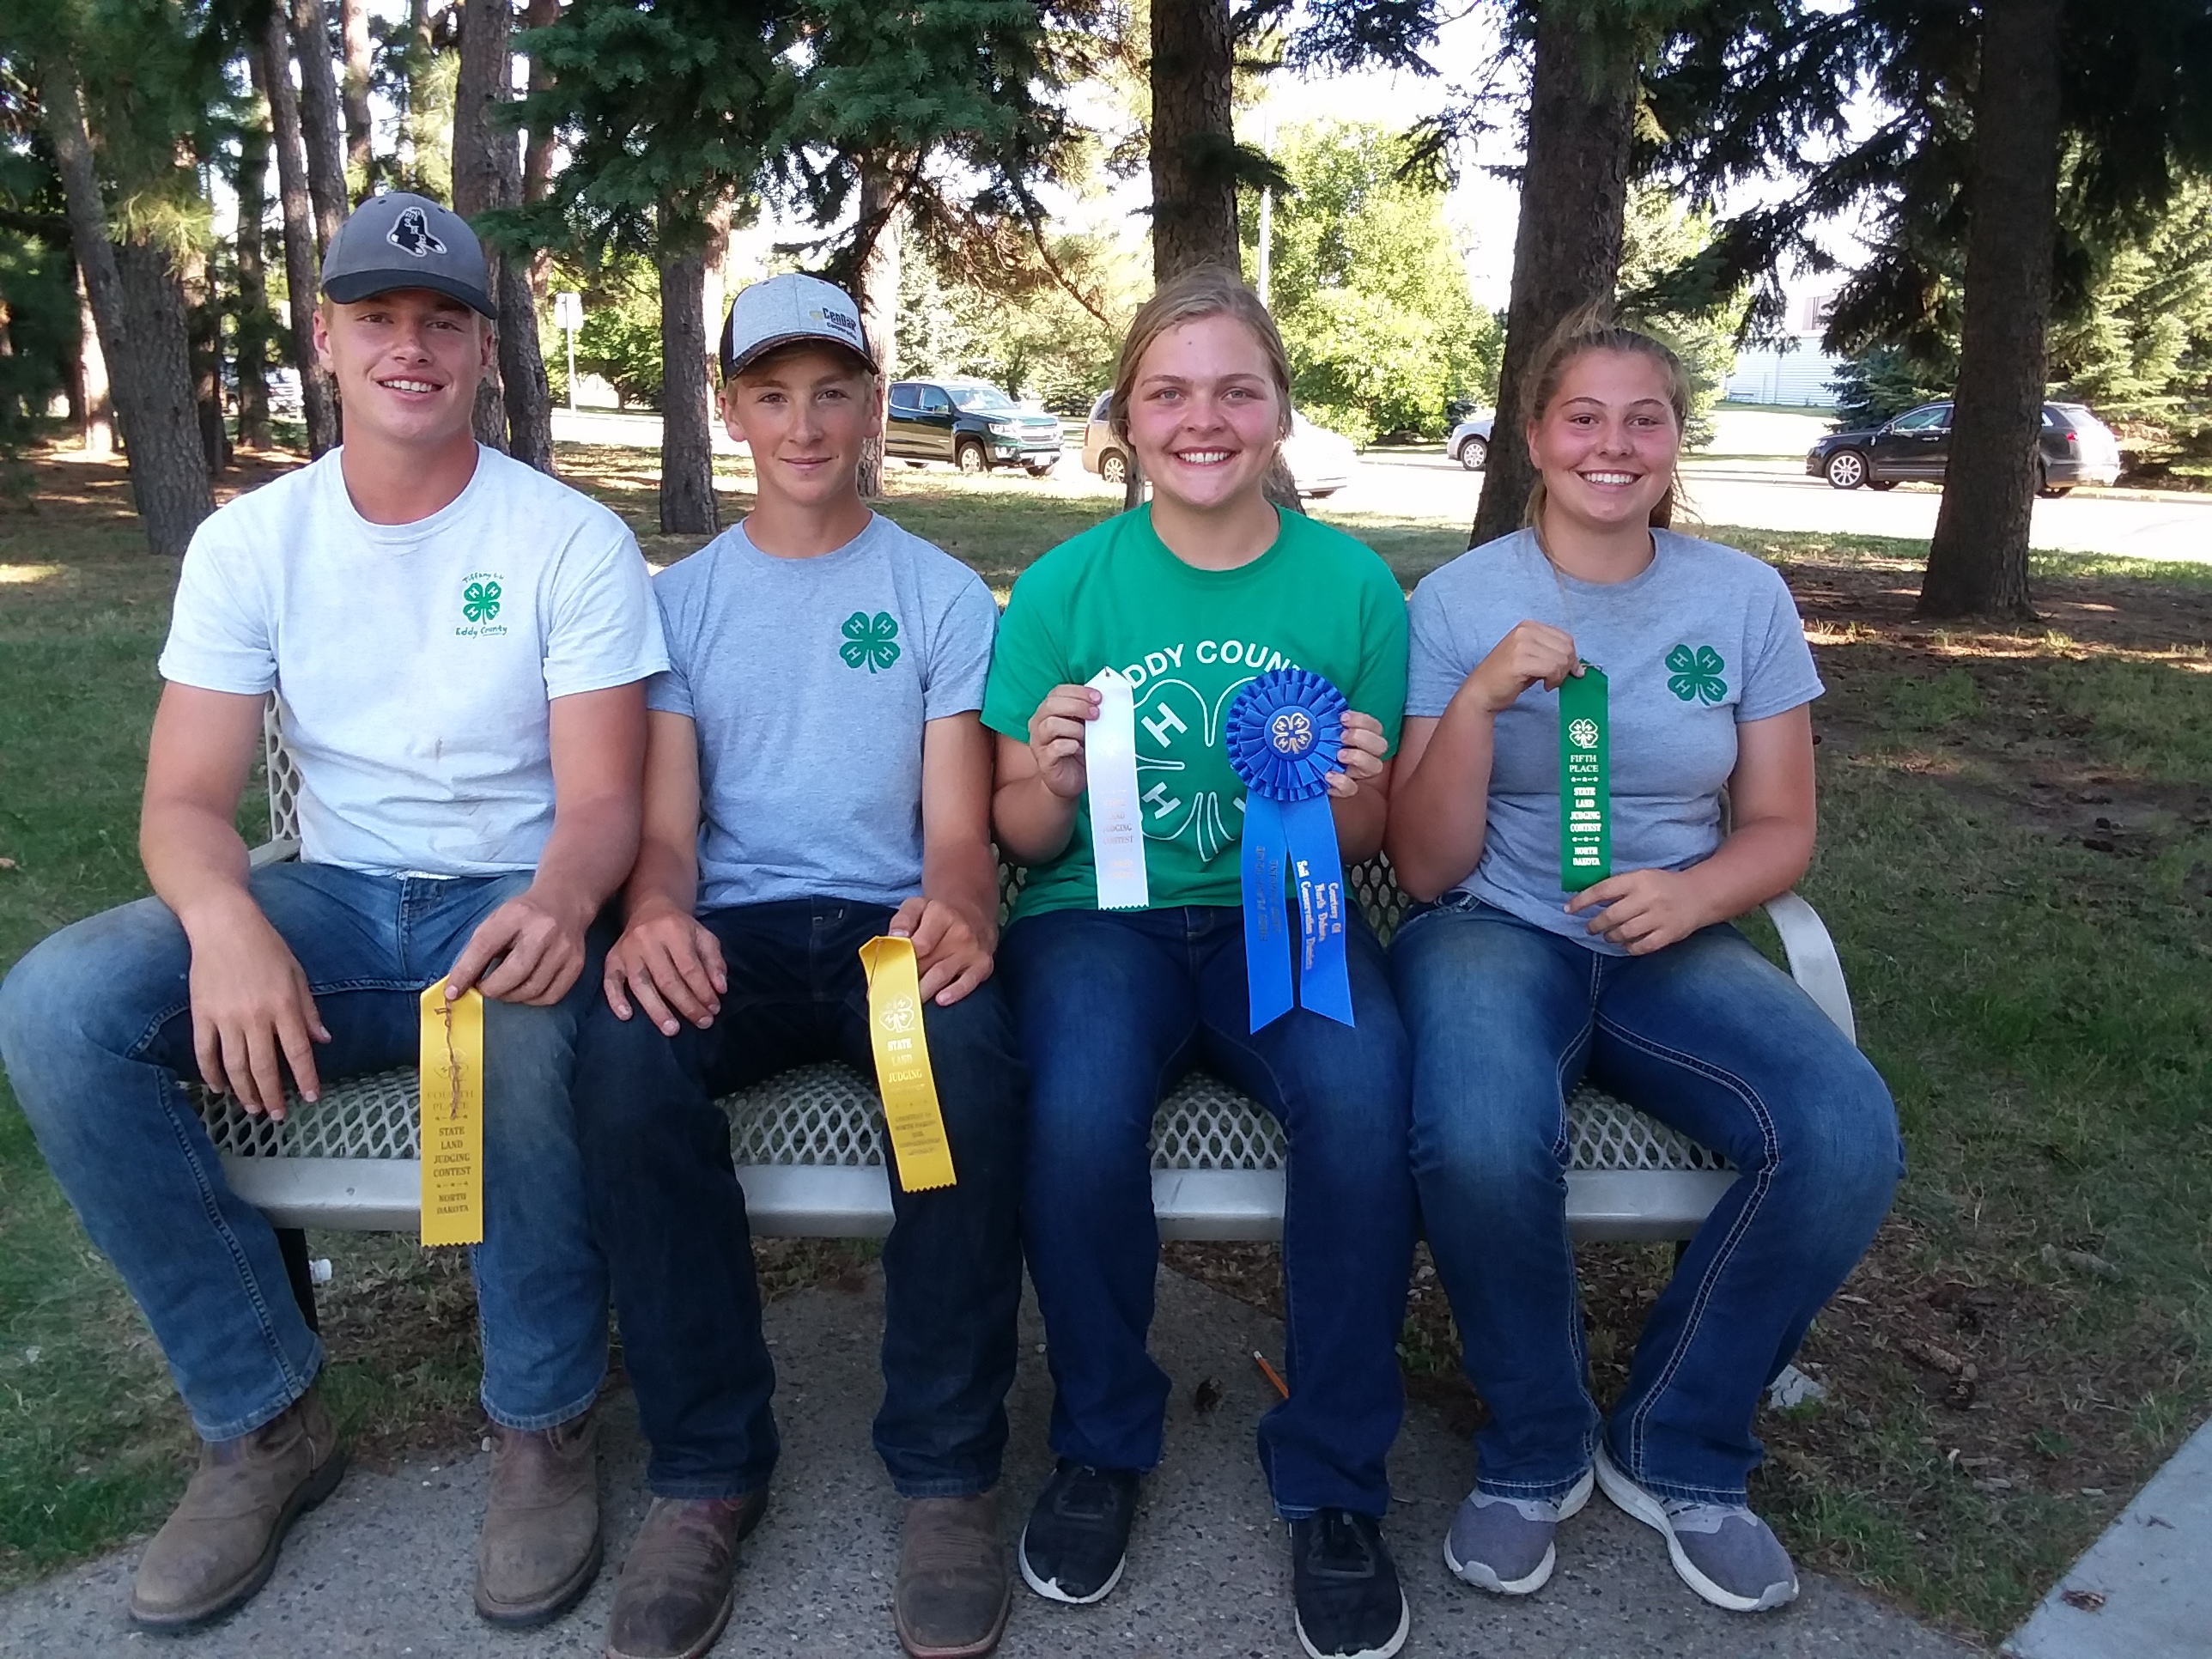 The Eddy County team places first in the senior division of the state 4-H land judging contest. Pictured are, from left, are Nicholas Berglund, Mason Schuster, Maria Becker and Macey Wobbema. (NDSU photo)